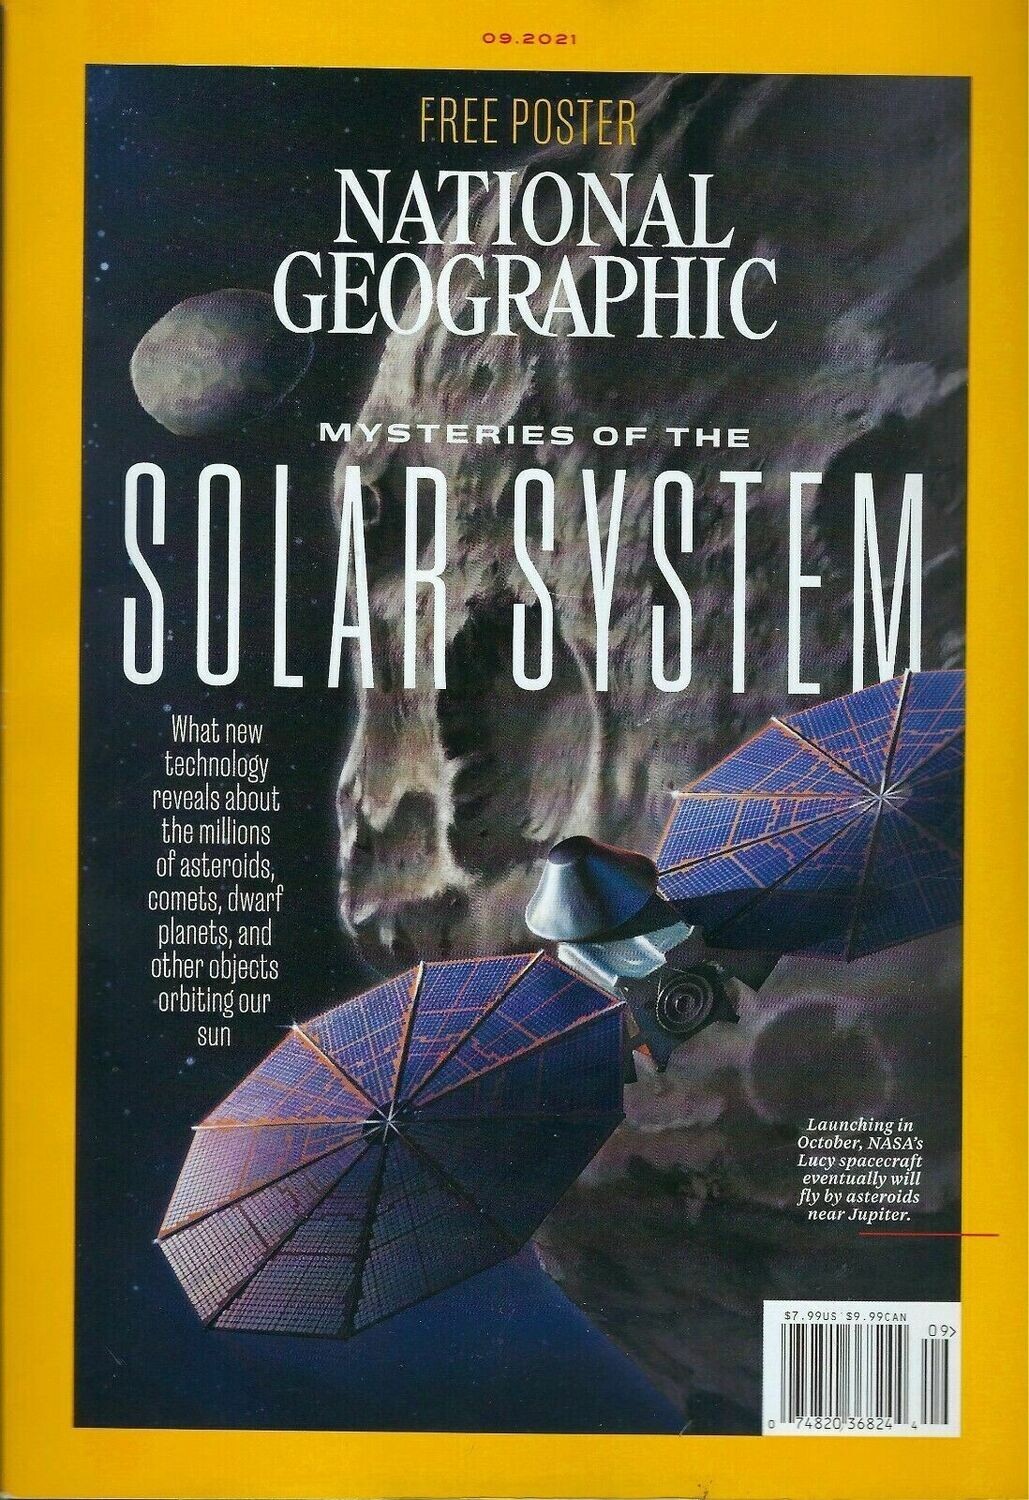 National Geographic September 2021 The Mysteries of the Solar System